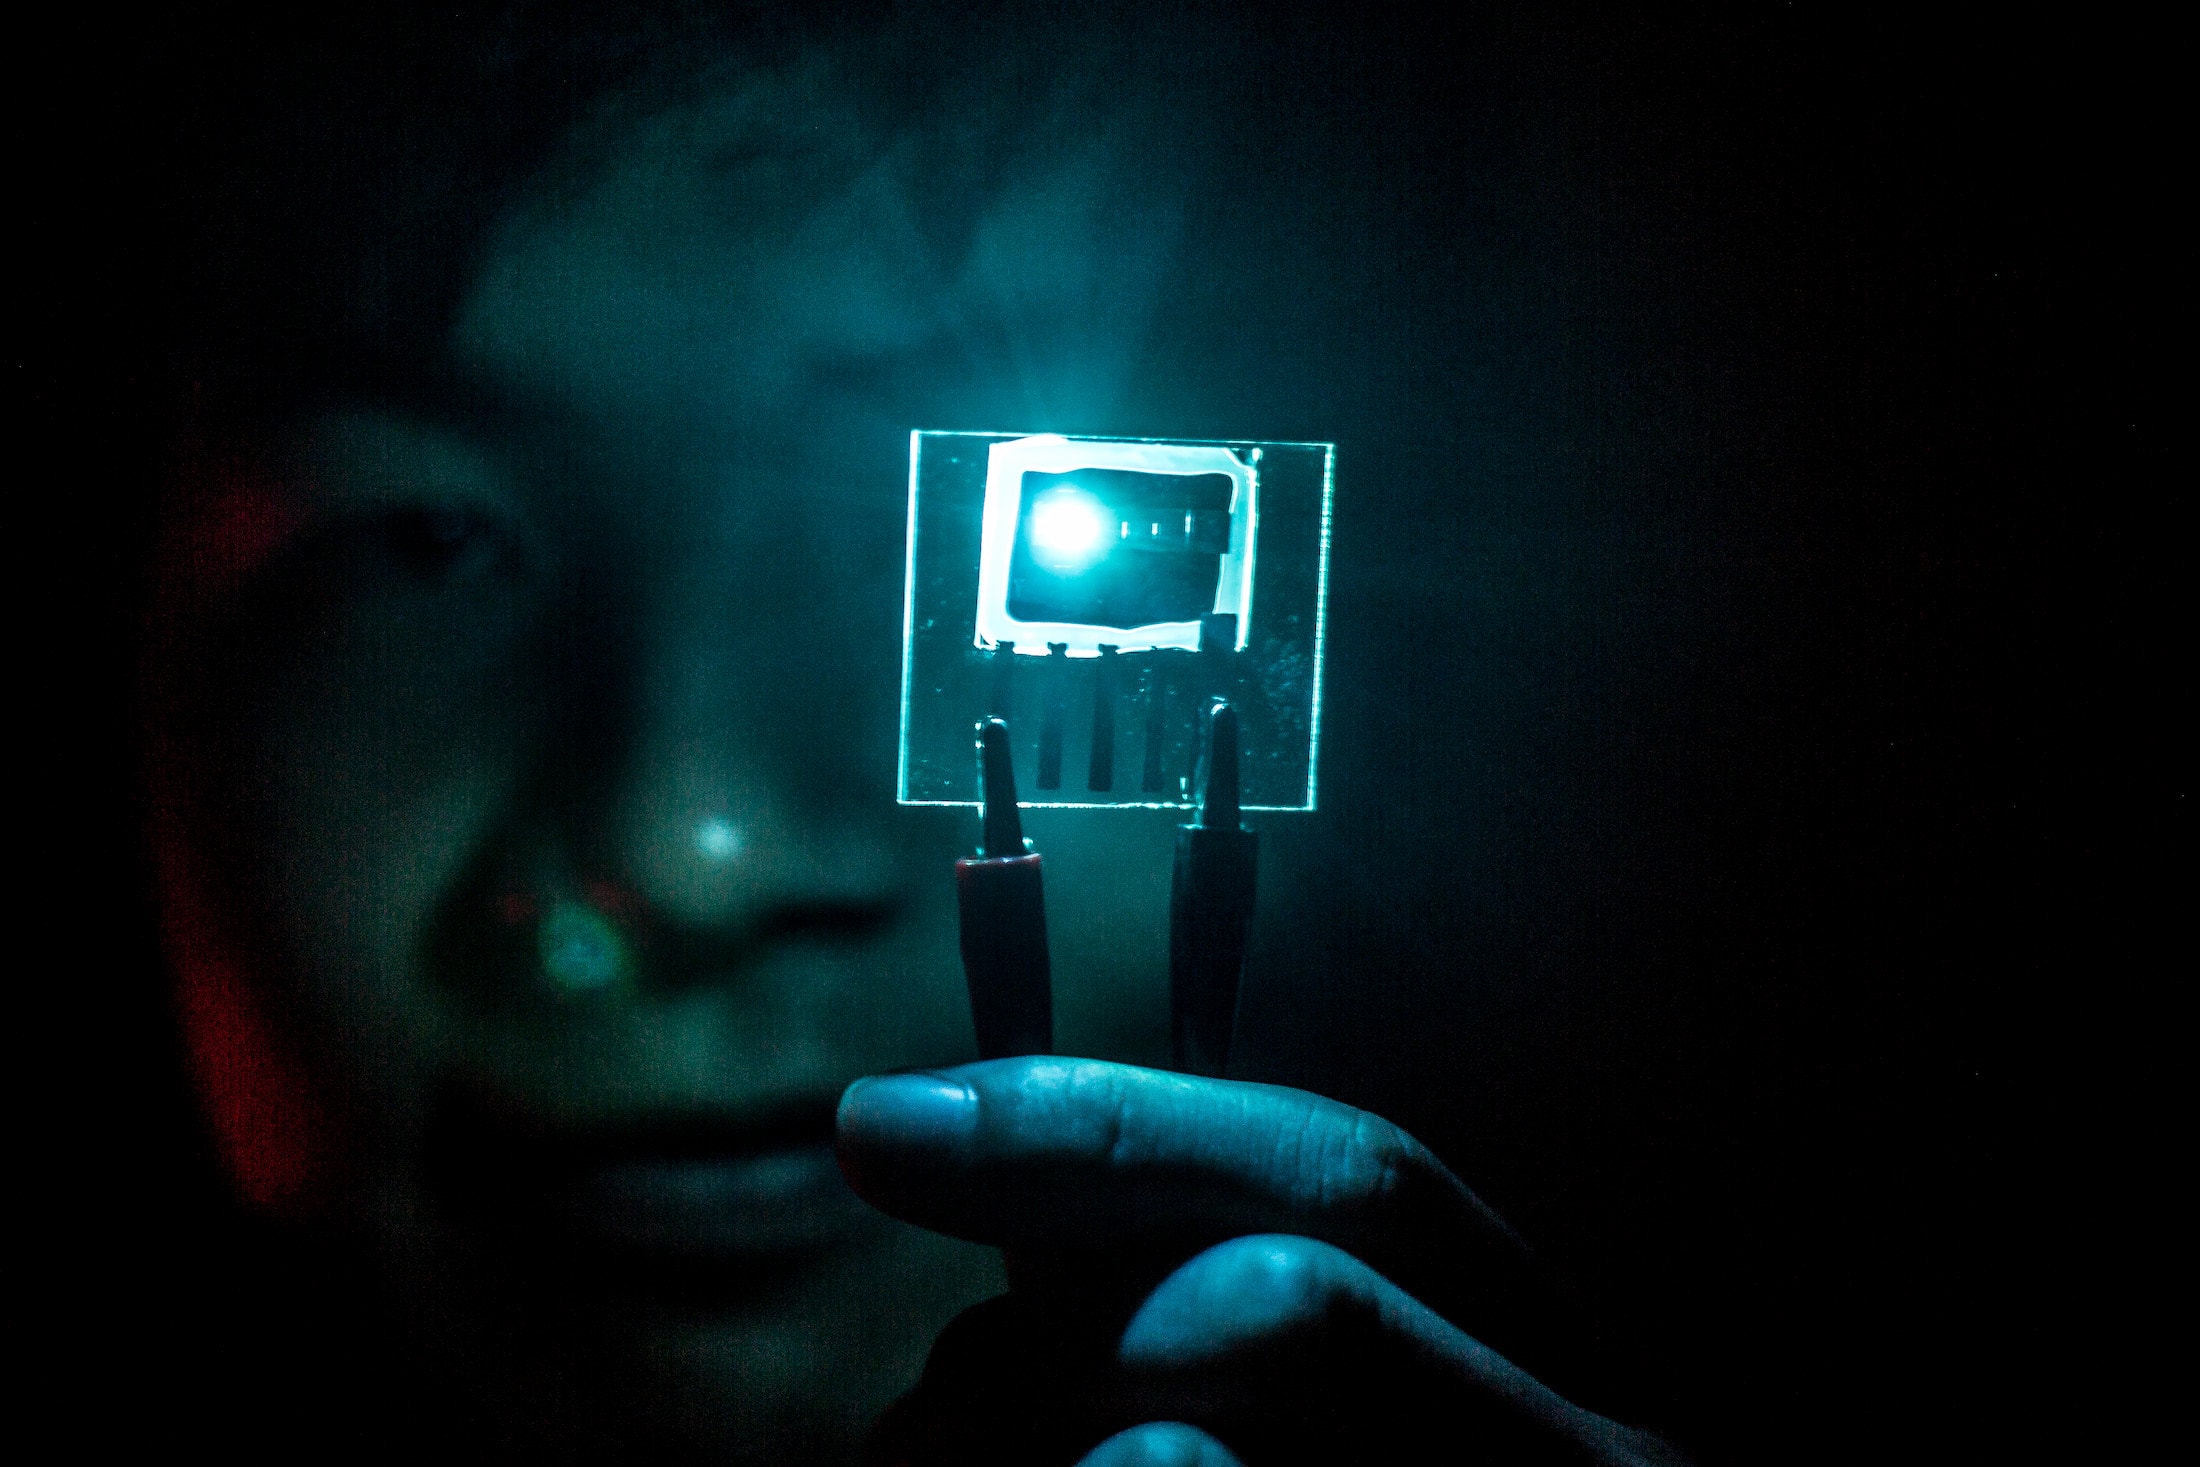 A researcher uses forceps to hold up a small chip in a dark room. The chip contains a blue PHOLED, which lights up the surrounding area. The lighting makes the researcher's hands and face appear a blue-green color.